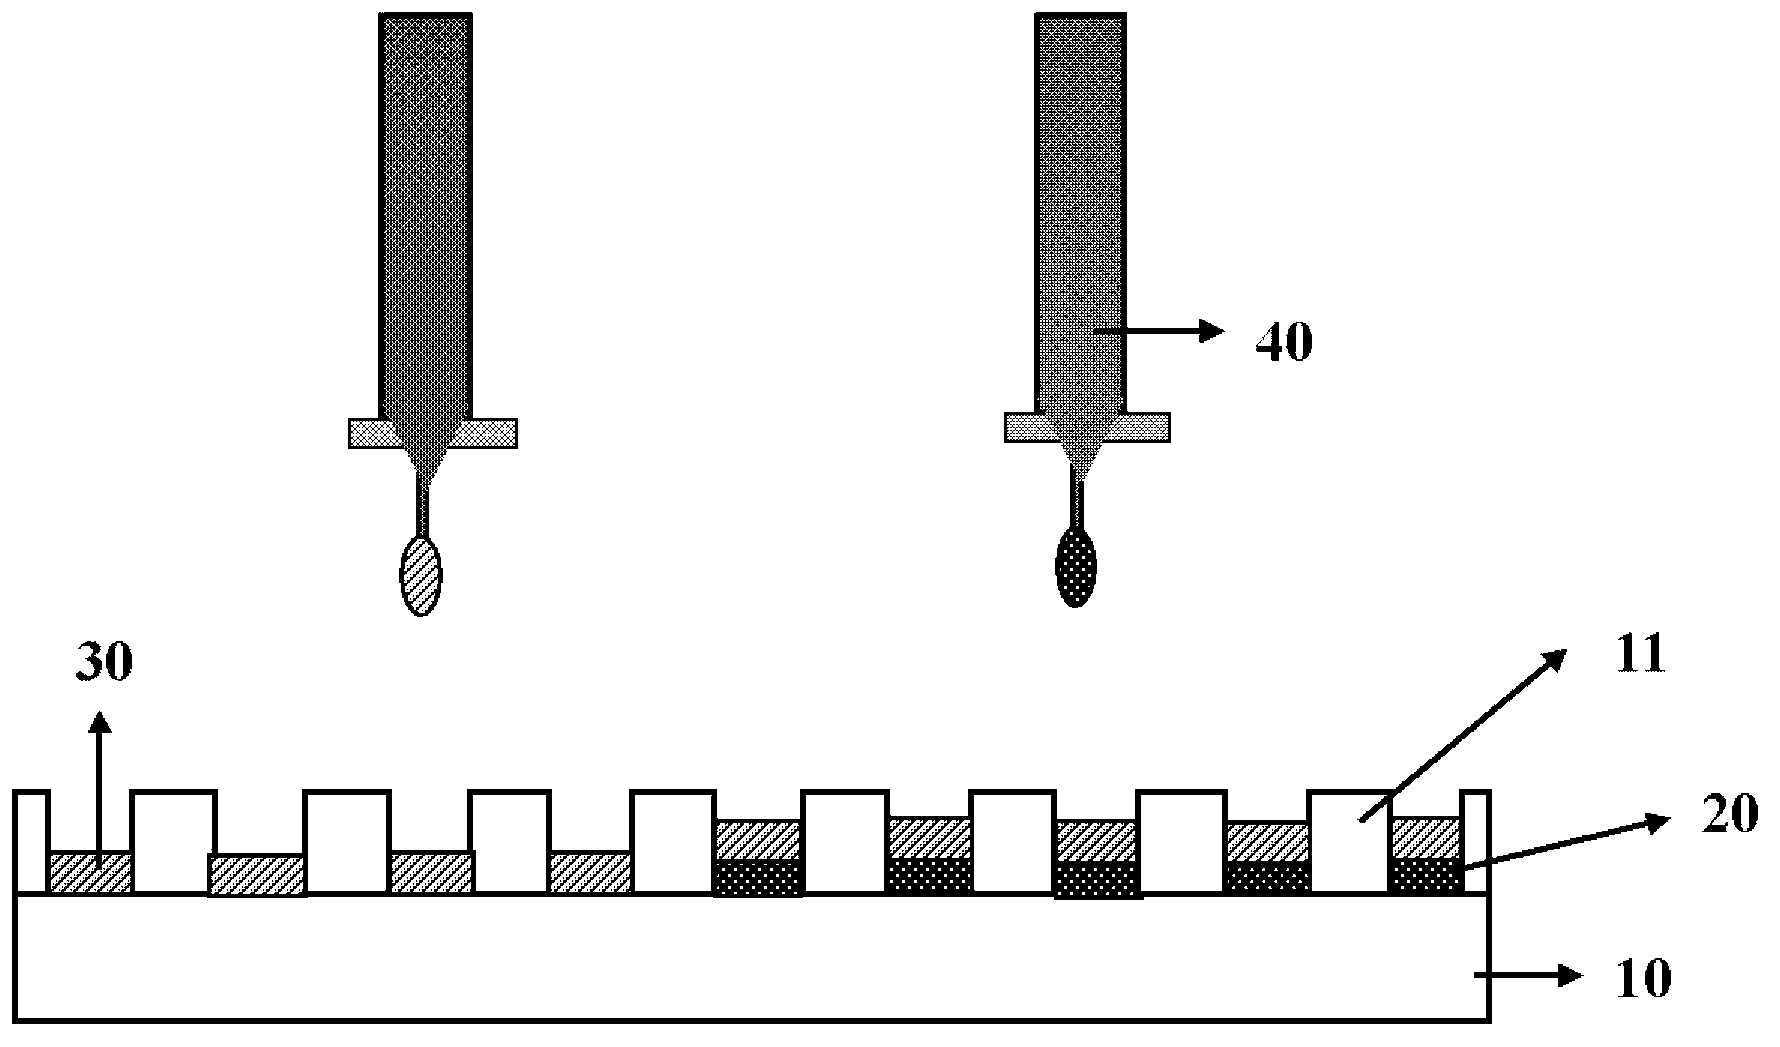 Method for manufacturing digital PCR (polymerase chain reaction) chip based on 3D (three-dimensional) printing platform